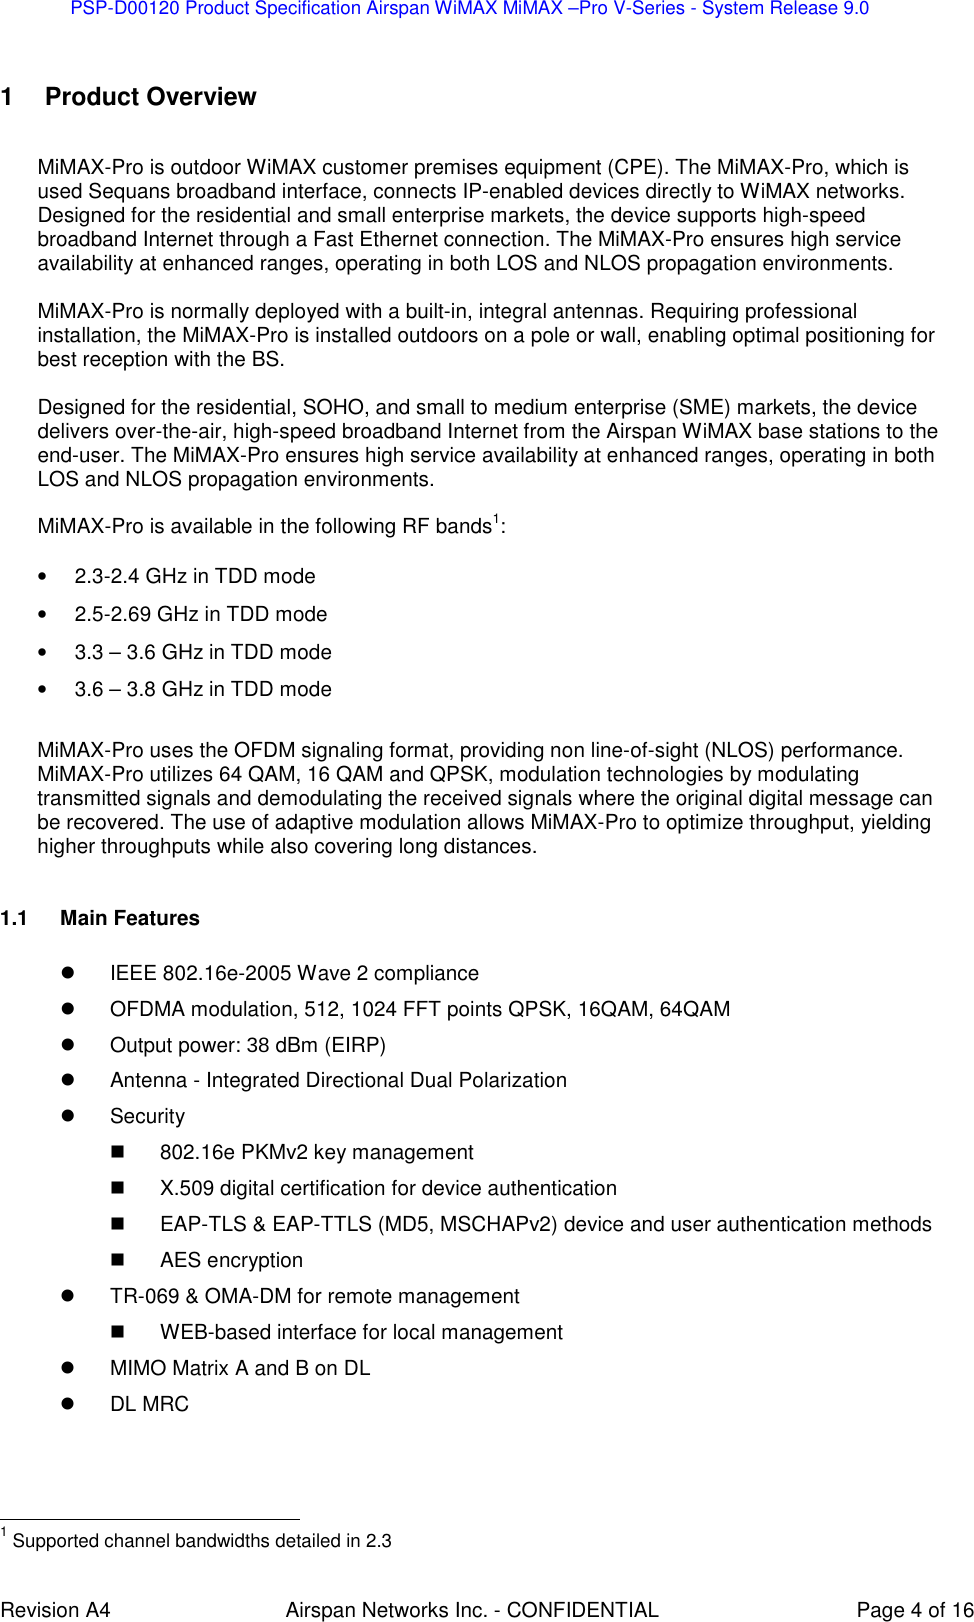 PSP-D00120 Product Specification Airspan WiMAX MiMAX –Pro V-Series - System Release 9.0    Revision A4  Airspan Networks Inc. - CONFIDENTIAL  Page 4 of 16  1  Product Overview  MiMAX-Pro is outdoor WiMAX customer premises equipment (CPE). The MiMAX-Pro, which is used Sequans broadband interface, connects IP-enabled devices directly to WiMAX networks. Designed for the residential and small enterprise markets, the device supports high-speed broadband Internet through a Fast Ethernet connection. The MiMAX-Pro ensures high service availability at enhanced ranges, operating in both LOS and NLOS propagation environments.  MiMAX-Pro is normally deployed with a built-in, integral antennas. Requiring professional installation, the MiMAX-Pro is installed outdoors on a pole or wall, enabling optimal positioning for best reception with the BS.   Designed for the residential, SOHO, and small to medium enterprise (SME) markets, the device delivers over-the-air, high-speed broadband Internet from the Airspan WiMAX base stations to the end-user. The MiMAX-Pro ensures high service availability at enhanced ranges, operating in both LOS and NLOS propagation environments.   MiMAX-Pro is available in the following RF bands1:  •  2.3-2.4 GHz in TDD mode •  2.5-2.69 GHz in TDD mode •  3.3 – 3.6 GHz in TDD mode •  3.6 – 3.8 GHz in TDD mode  MiMAX-Pro uses the OFDM signaling format, providing non line-of-sight (NLOS) performance. MiMAX-Pro utilizes 64 QAM, 16 QAM and QPSK, modulation technologies by modulating transmitted signals and demodulating the received signals where the original digital message can be recovered. The use of adaptive modulation allows MiMAX-Pro to optimize throughput, yielding higher throughputs while also covering long distances.    1.1  Main Features    IEEE 802.16e-2005 Wave 2 compliance   OFDMA modulation, 512, 1024 FFT points QPSK, 16QAM, 64QAM   Output power: 38 dBm (EIRP)   Antenna - Integrated Directional Dual Polarization    Security   802.16e PKMv2 key management   X.509 digital certification for device authentication   EAP-TLS &amp; EAP-TTLS (MD5, MSCHAPv2) device and user authentication methods   AES encryption   TR-069 &amp; OMA-DM for remote management   WEB-based interface for local management   MIMO Matrix A and B on DL   DL MRC                                                          1 Supported channel bandwidths detailed in 2.3   